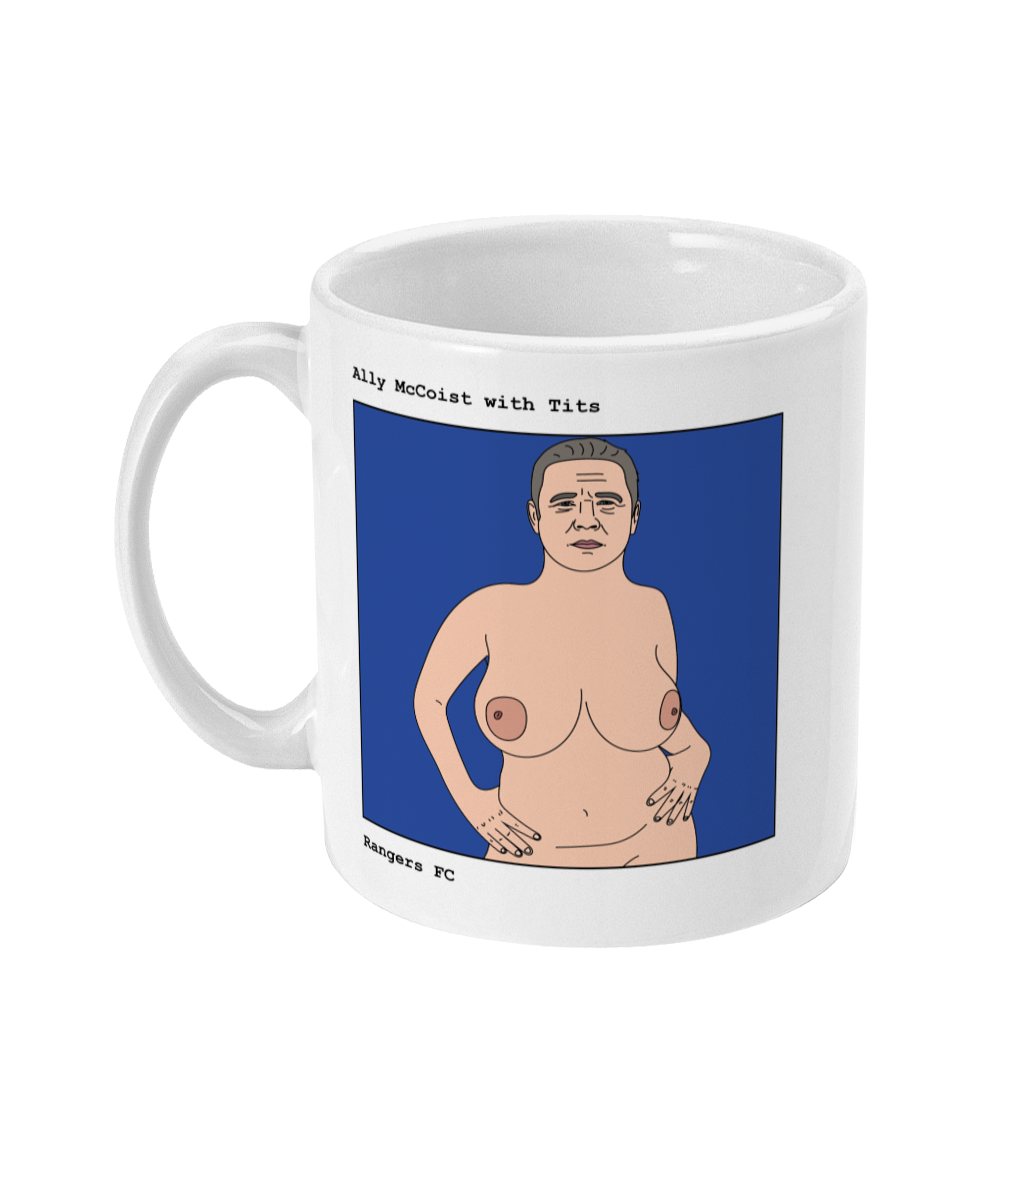 Ally McCoist with Tits - Footballers with Tits